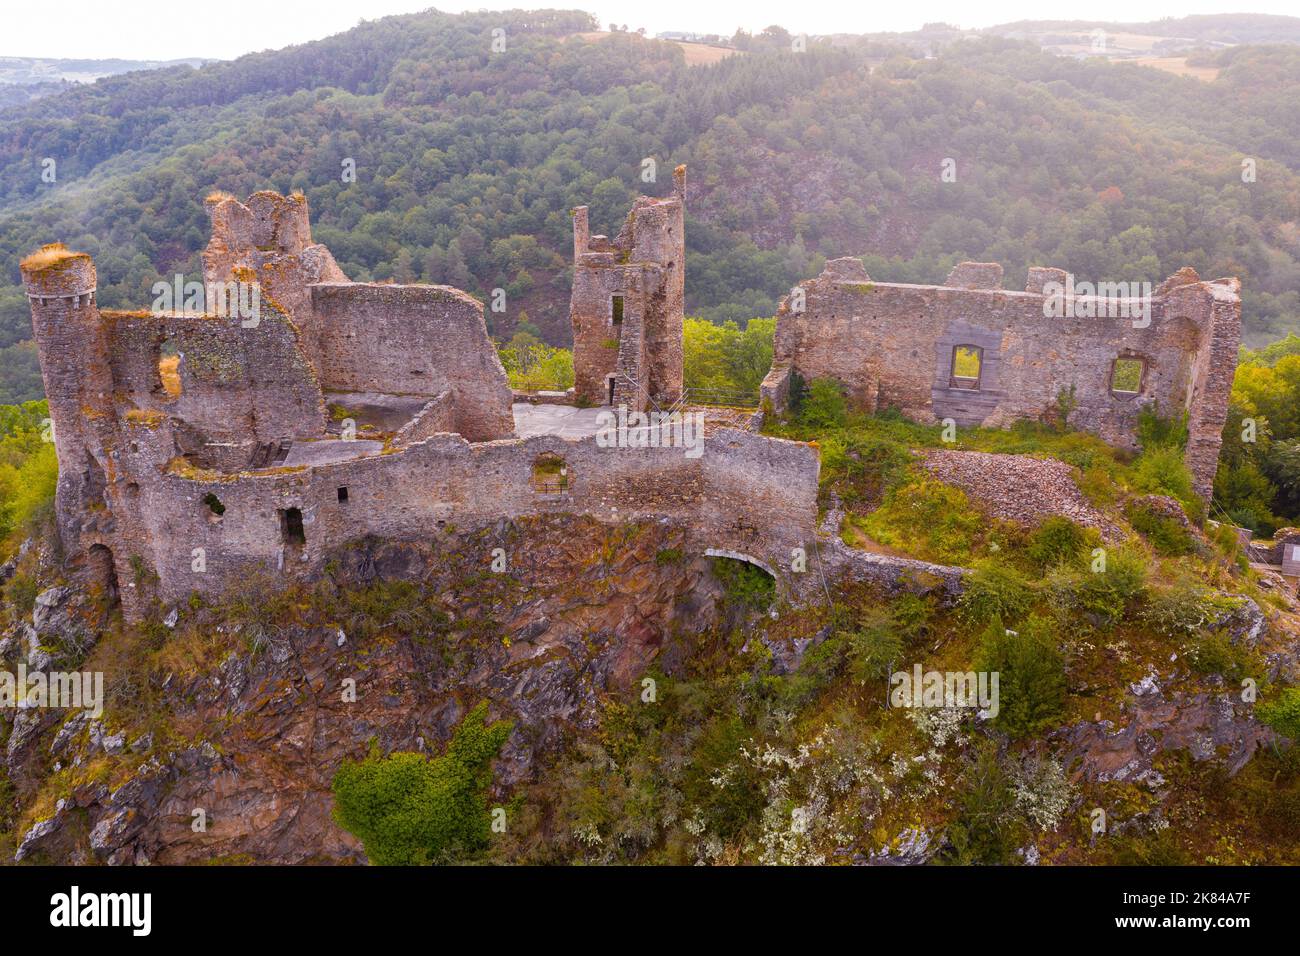 Aerial view of romantic ruins of Chateau Rocher, France Stock Photo